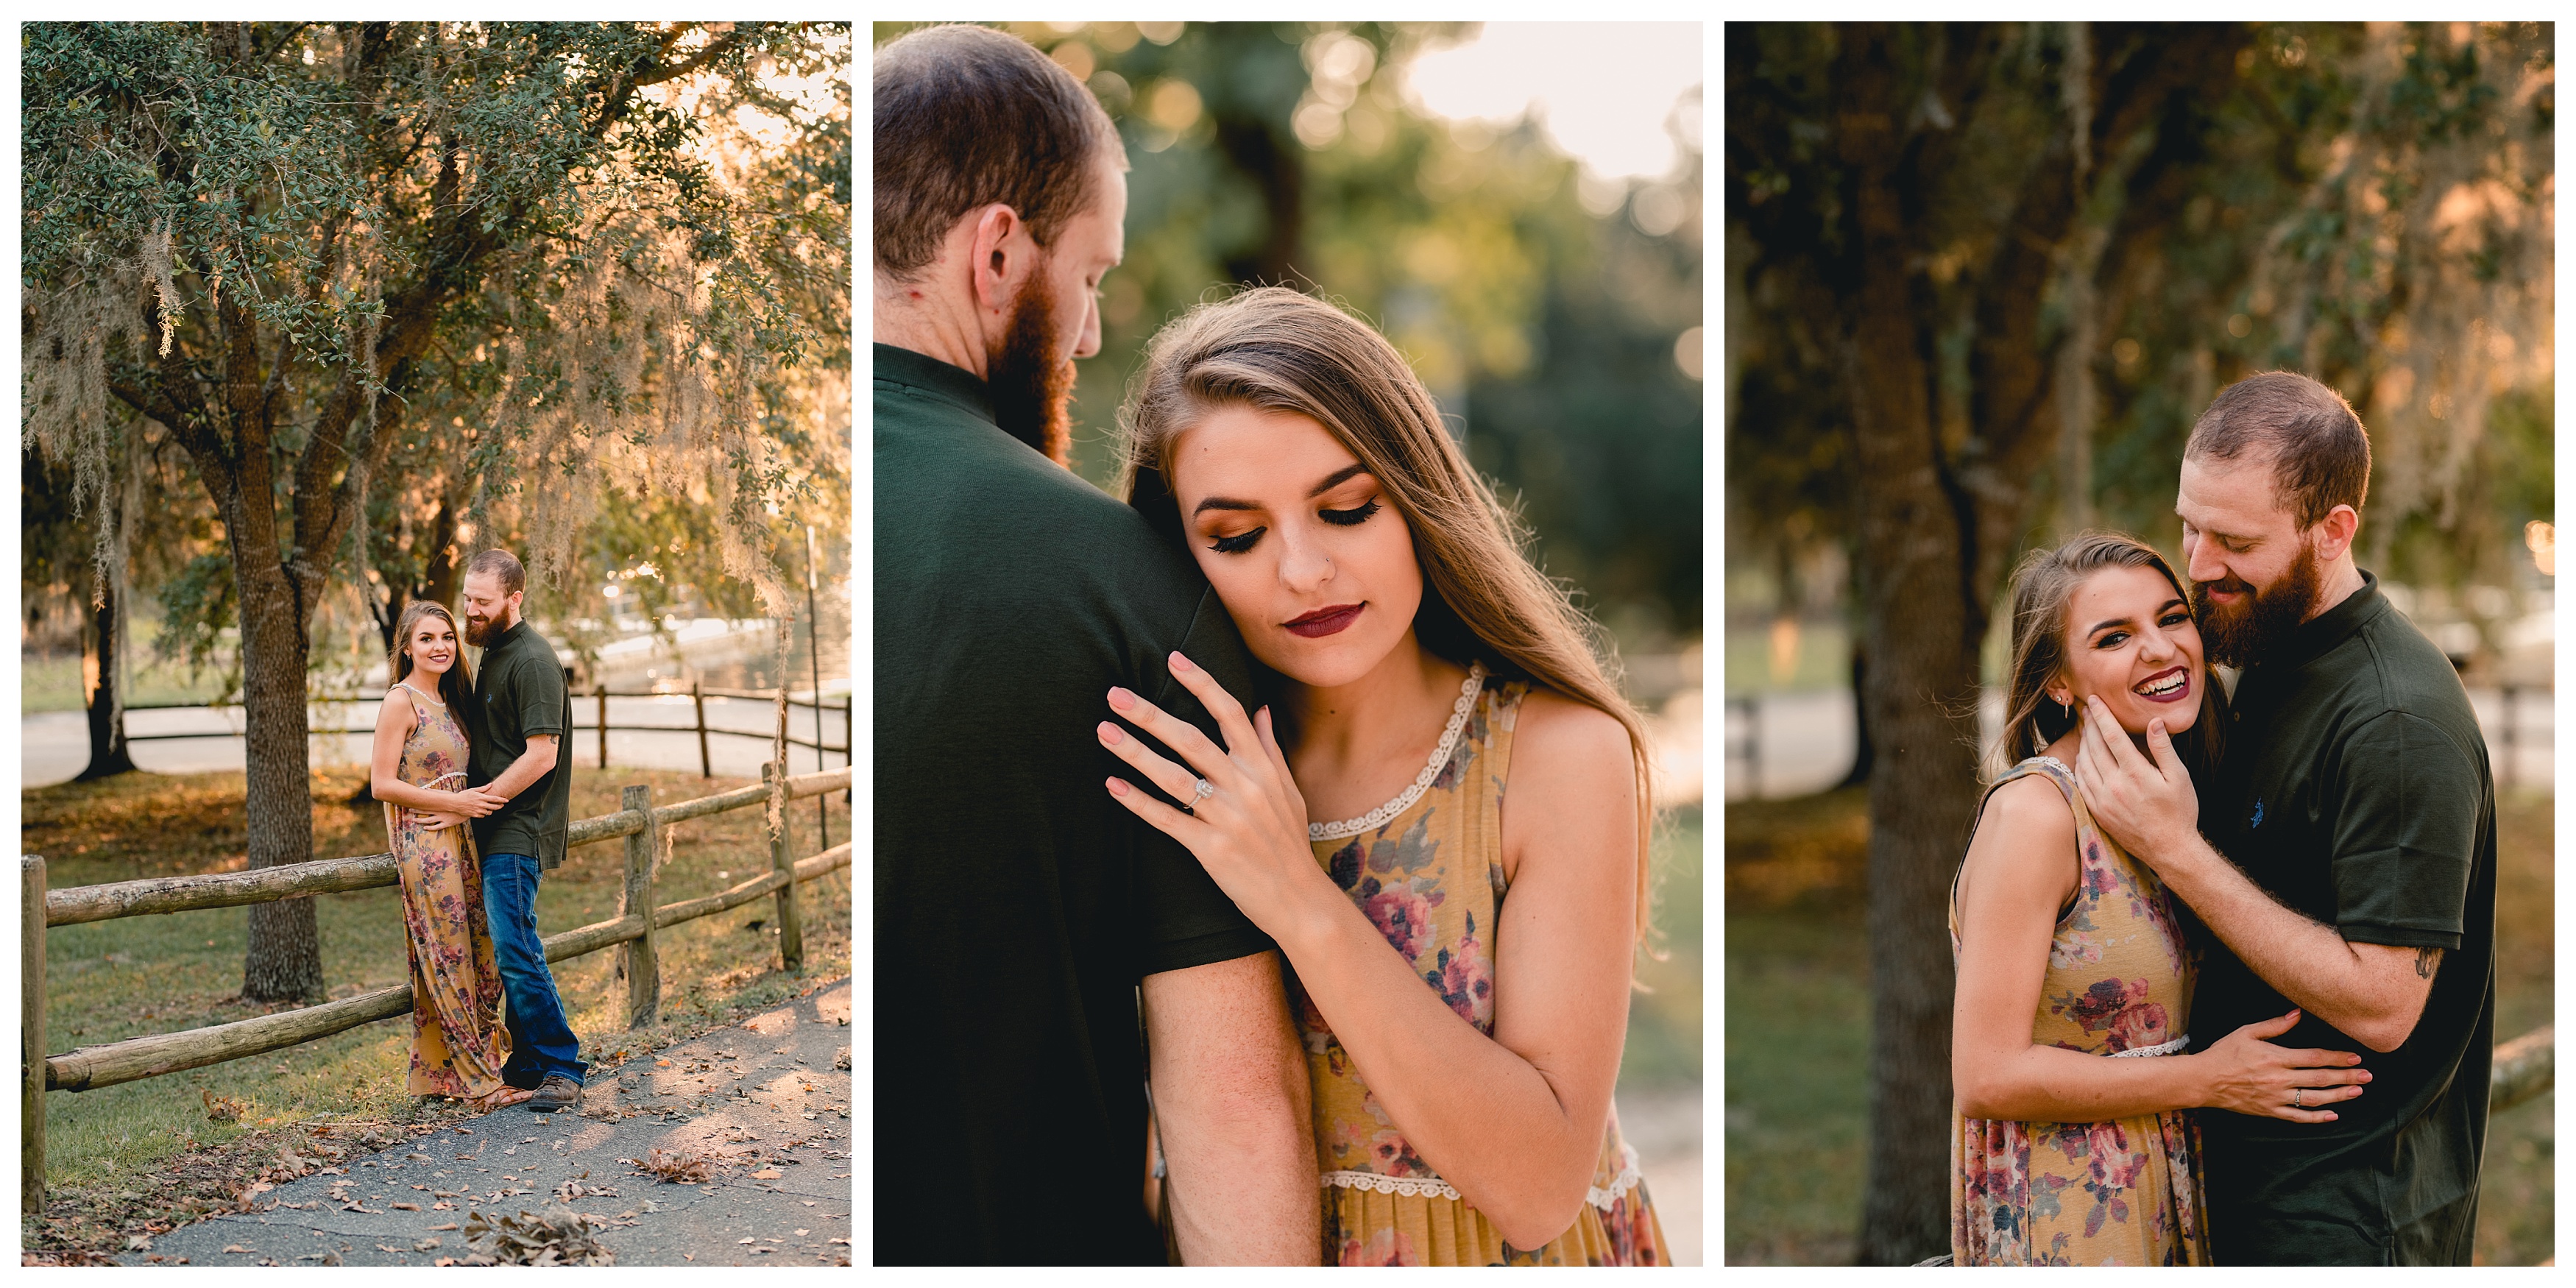 Intimate engagement photos with a natural and timeless style in Tallahassee, Florida. Shelly Williams Photography